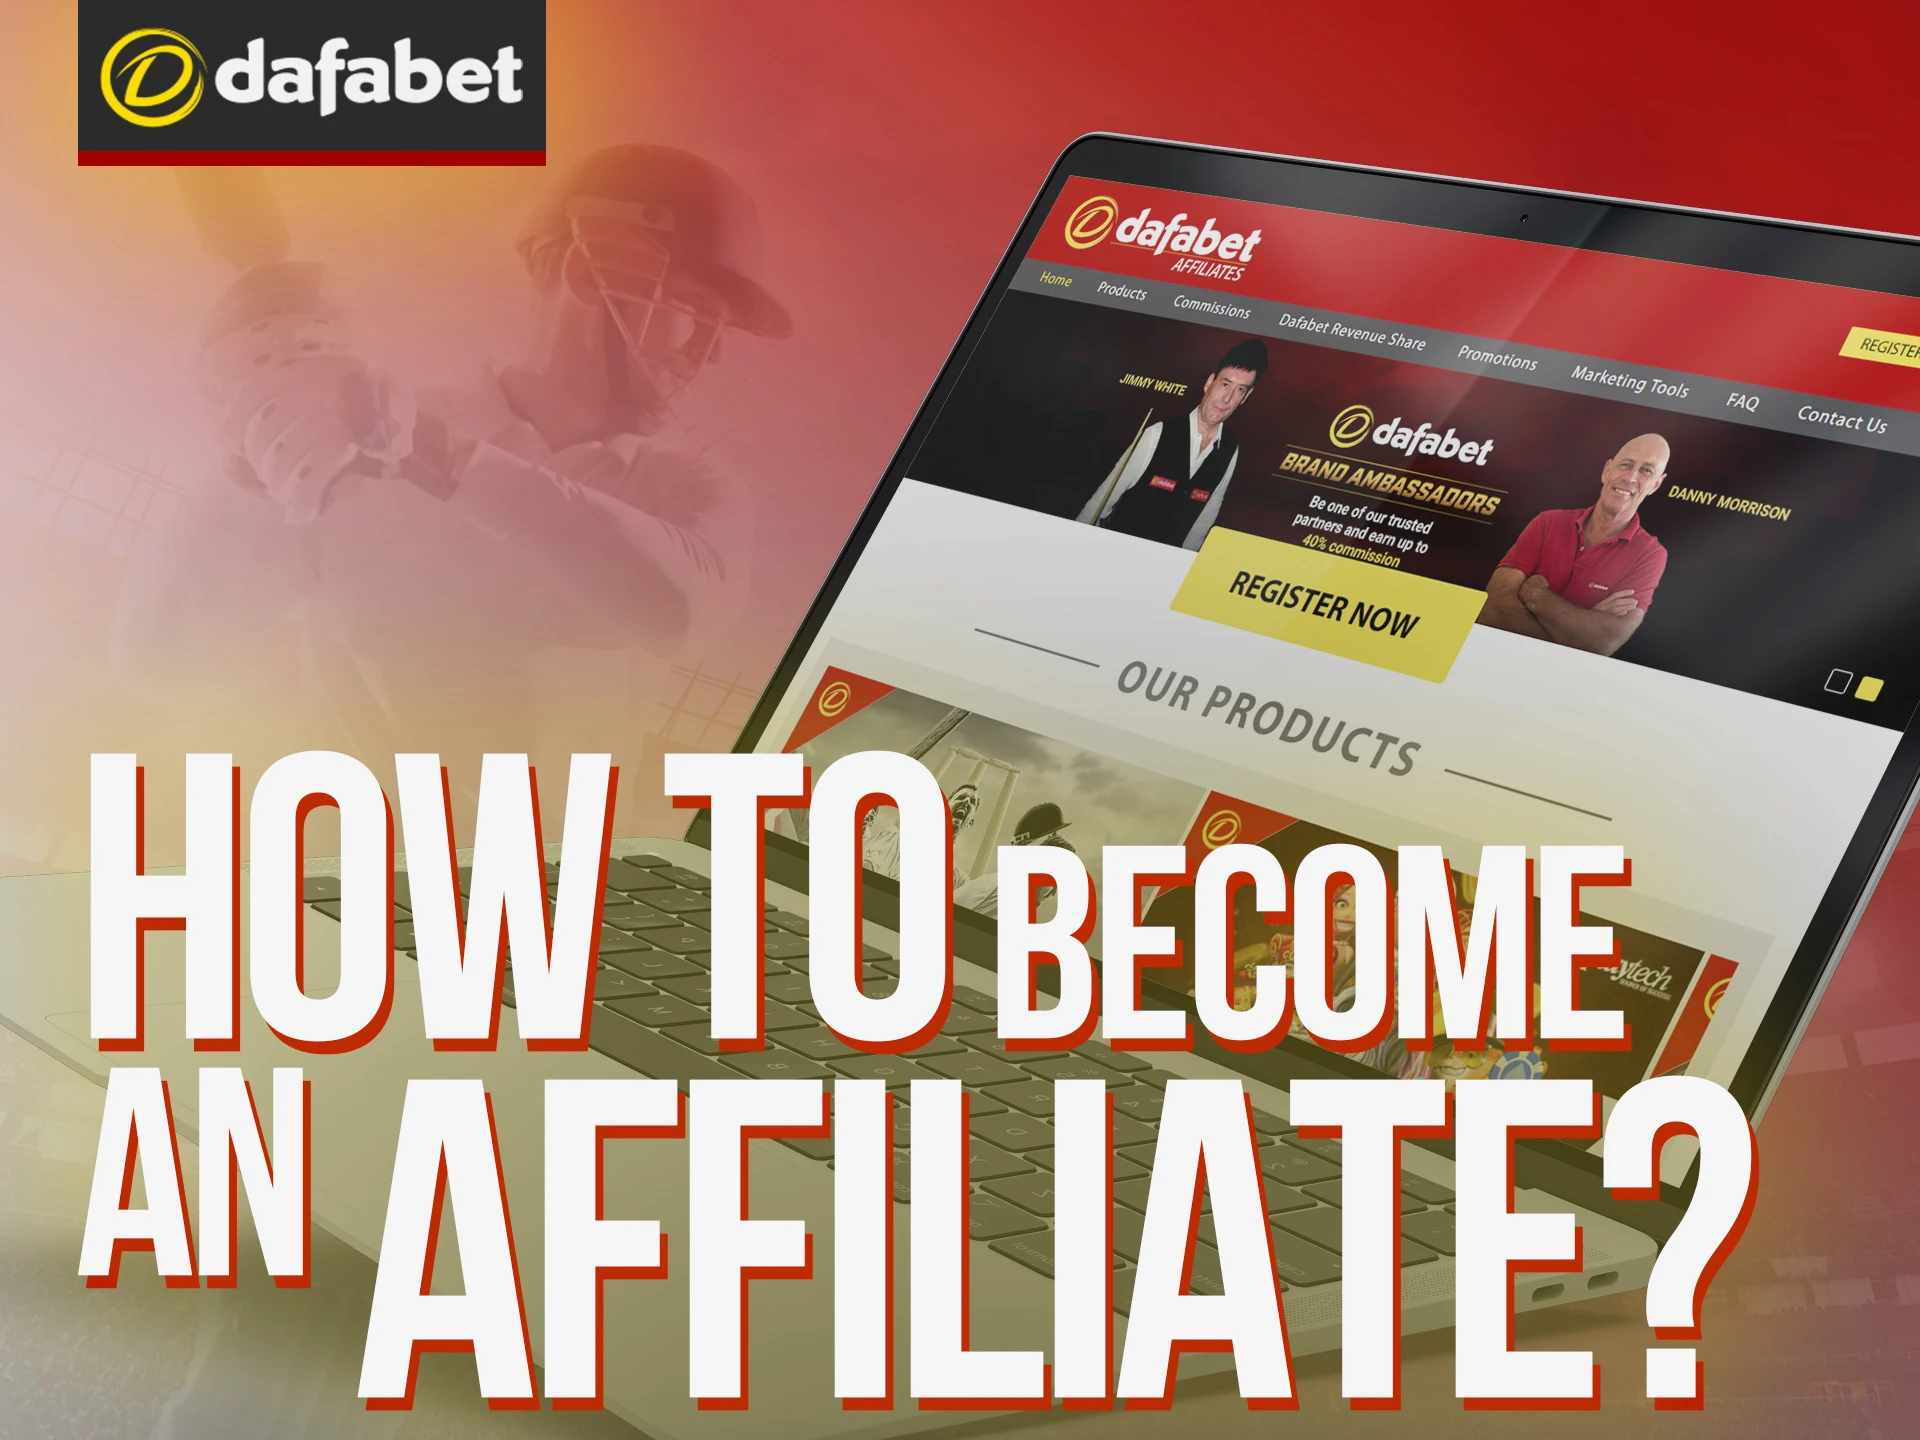 Make your Dafabet account and become affiliate.